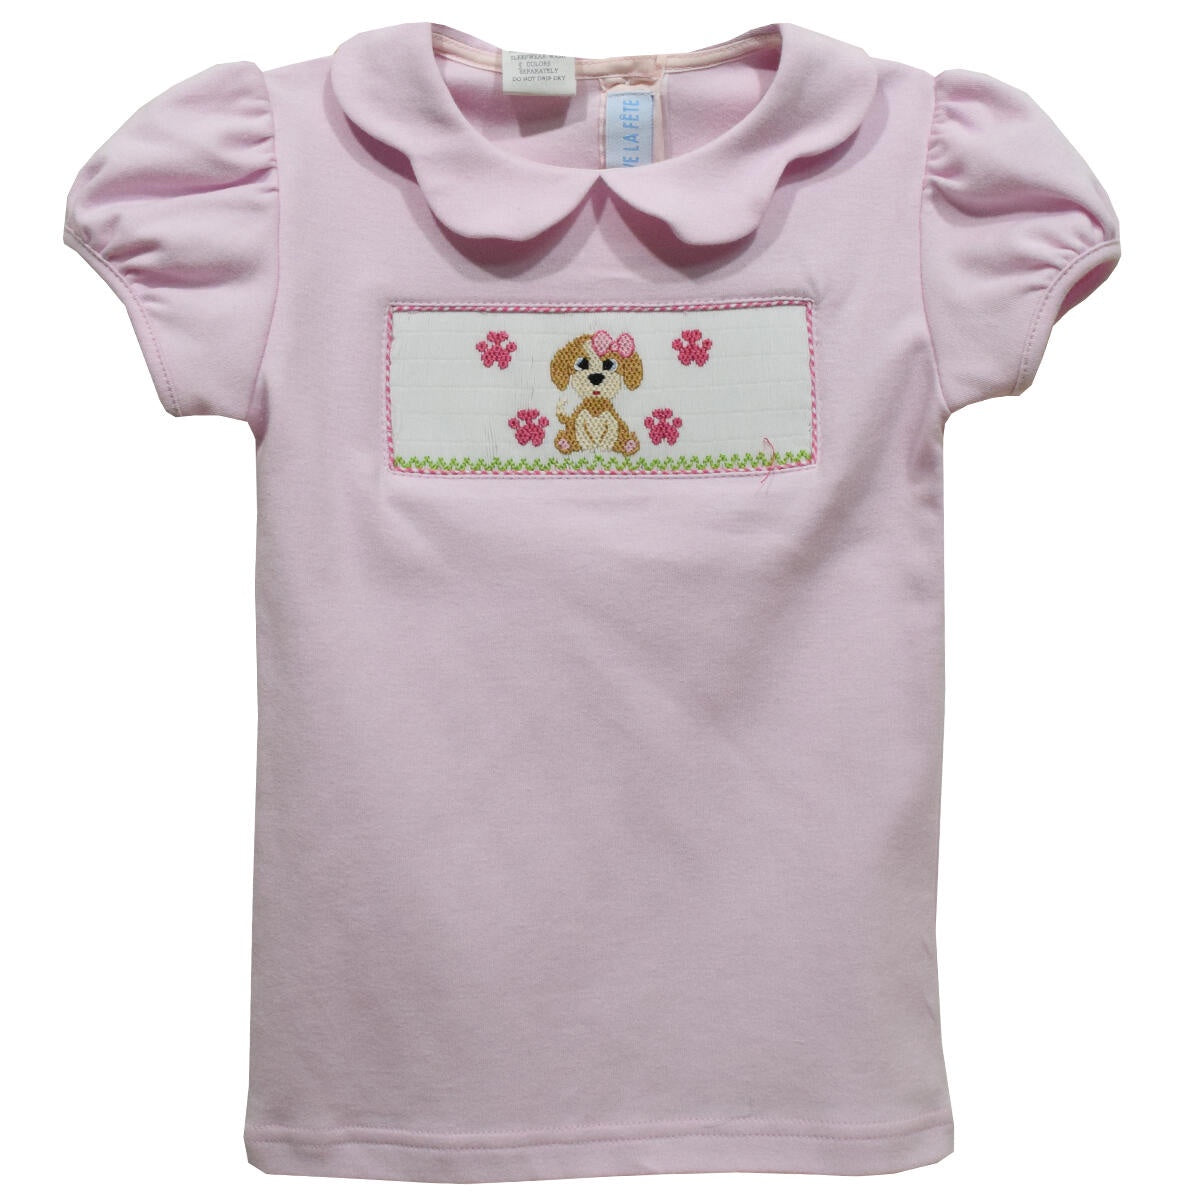 Vive La Fete Puppies Pink Knit Puff Sleeve Girls Top 5103